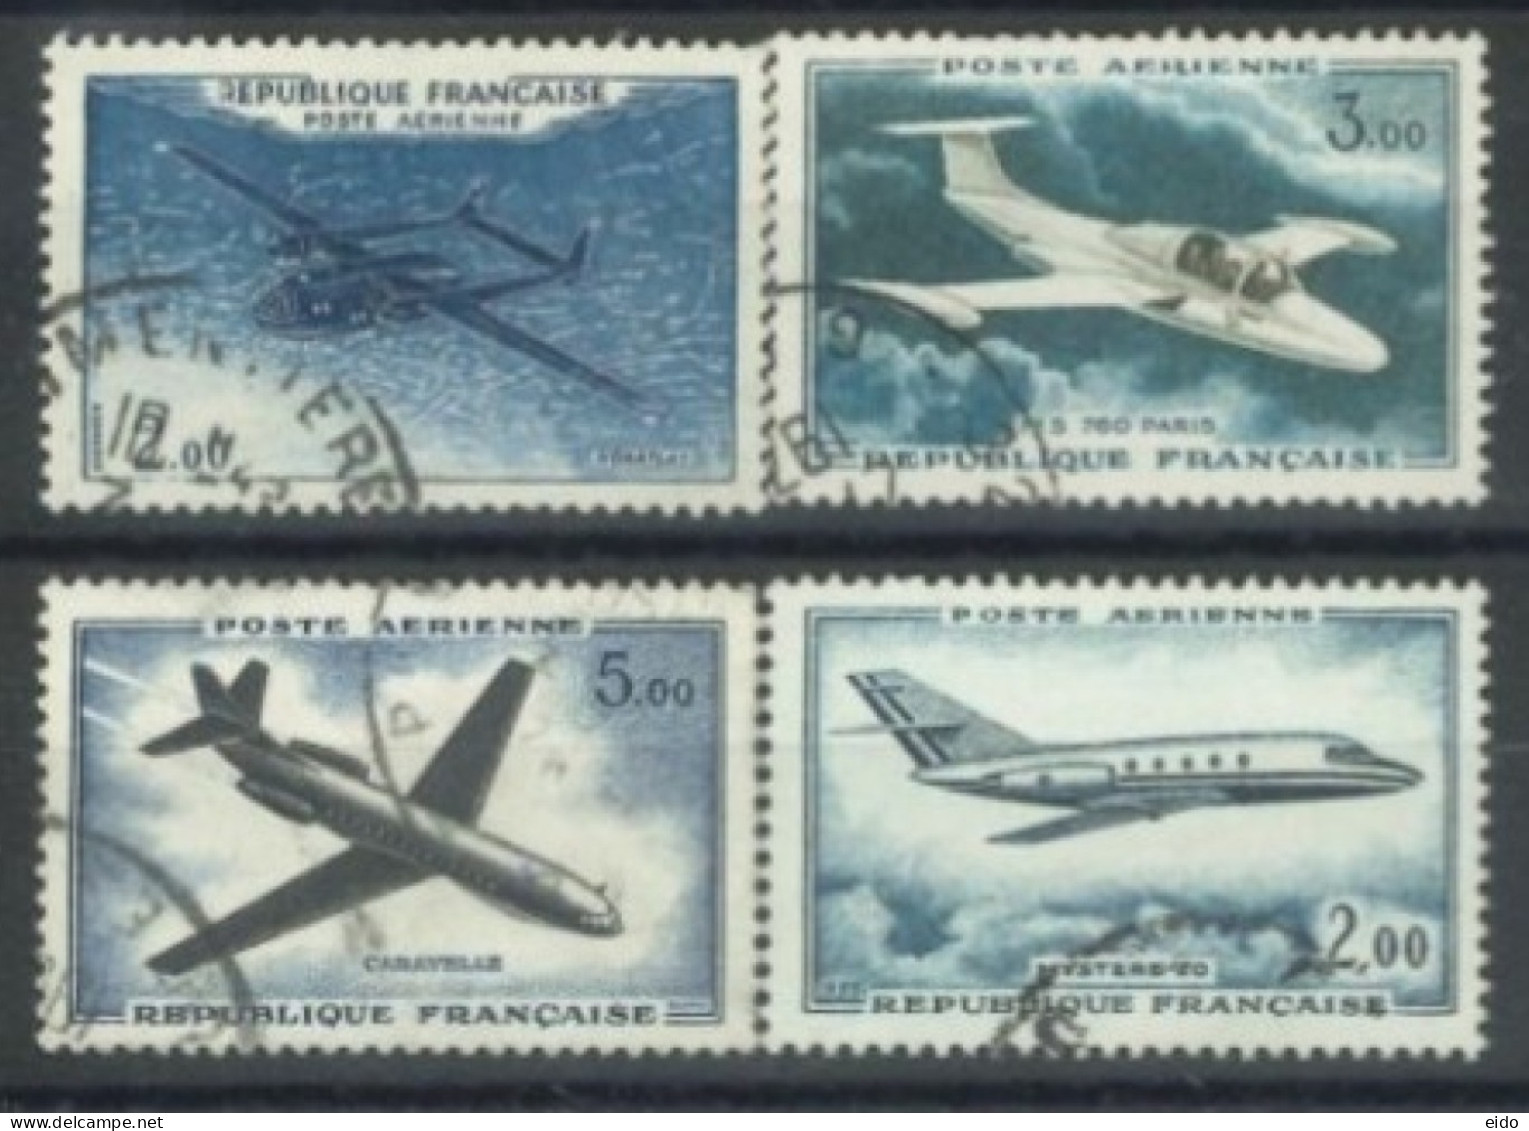 FRANCE - 1960/65- AIR PLANES STAMPS SET OF 4, USED - Used Stamps